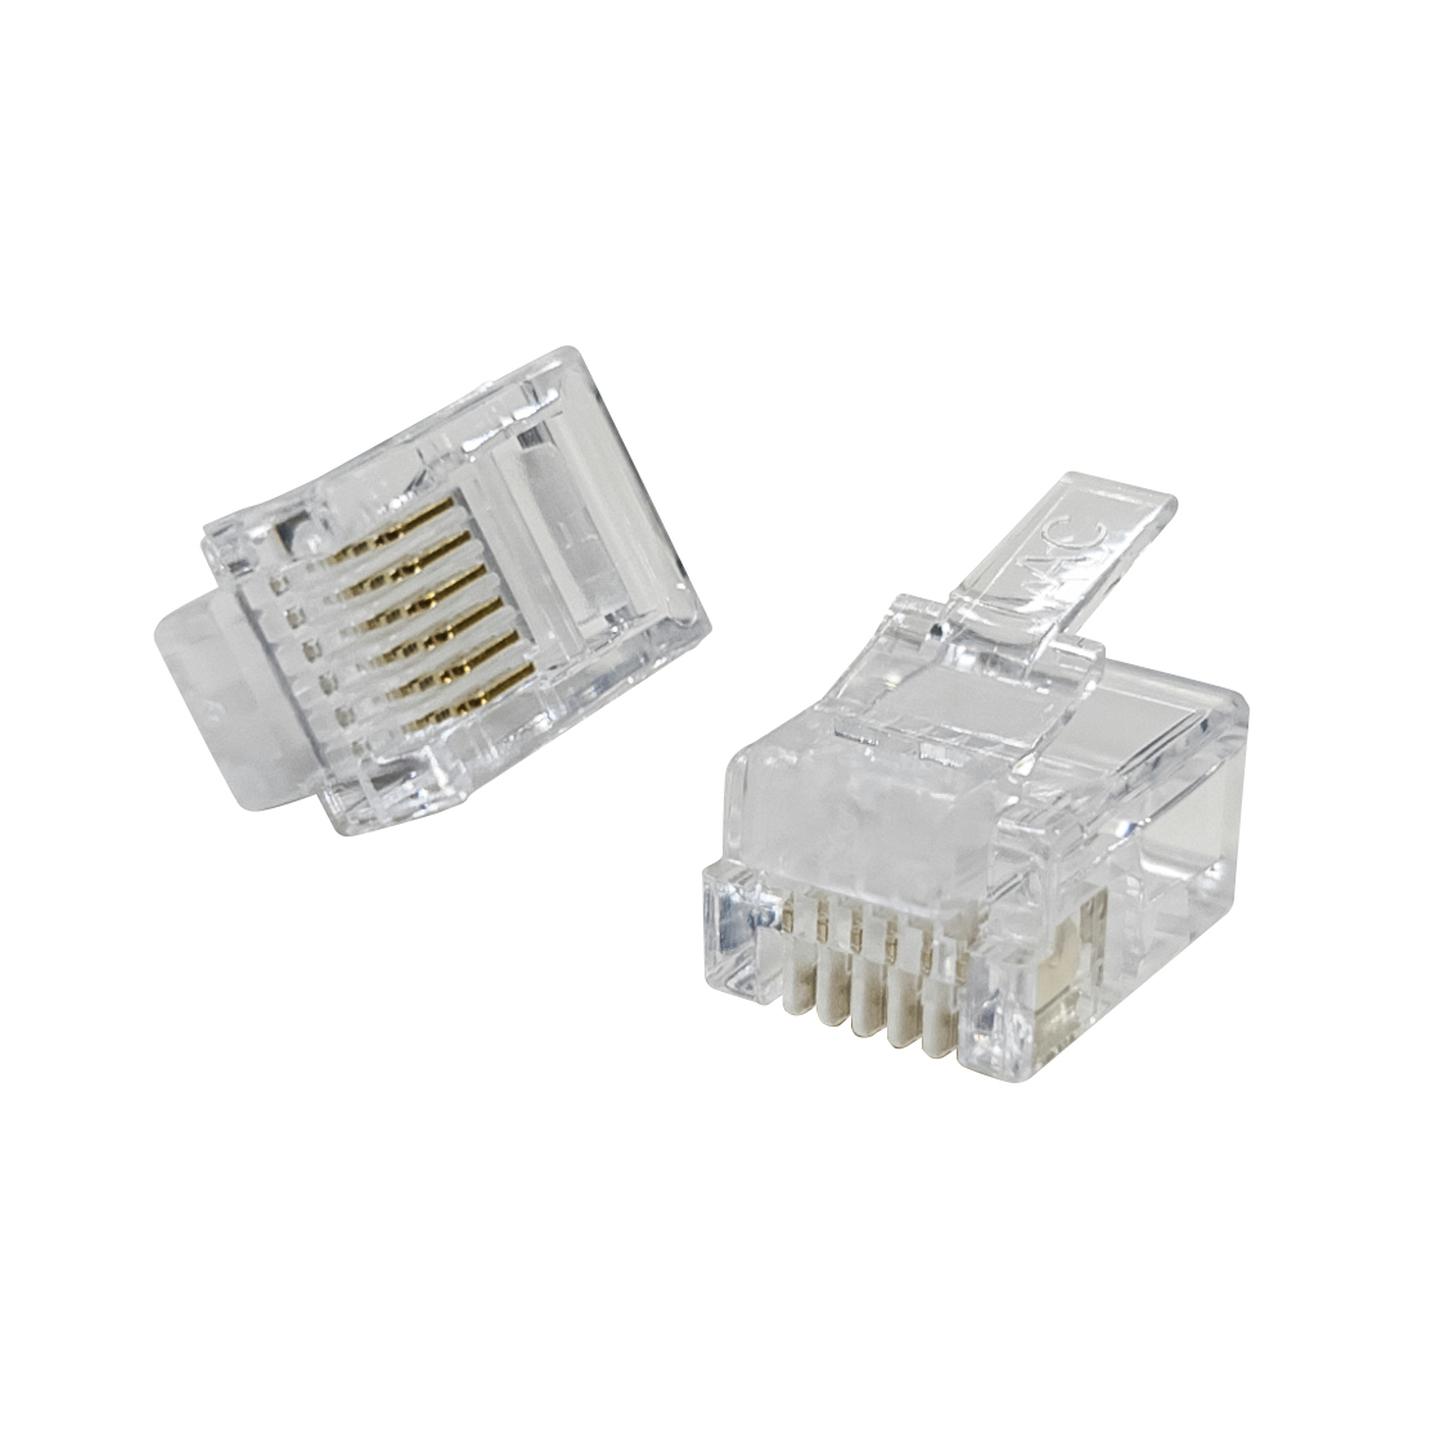 RJ12 Telephone plugs for Stranded Cable - Pack of 50